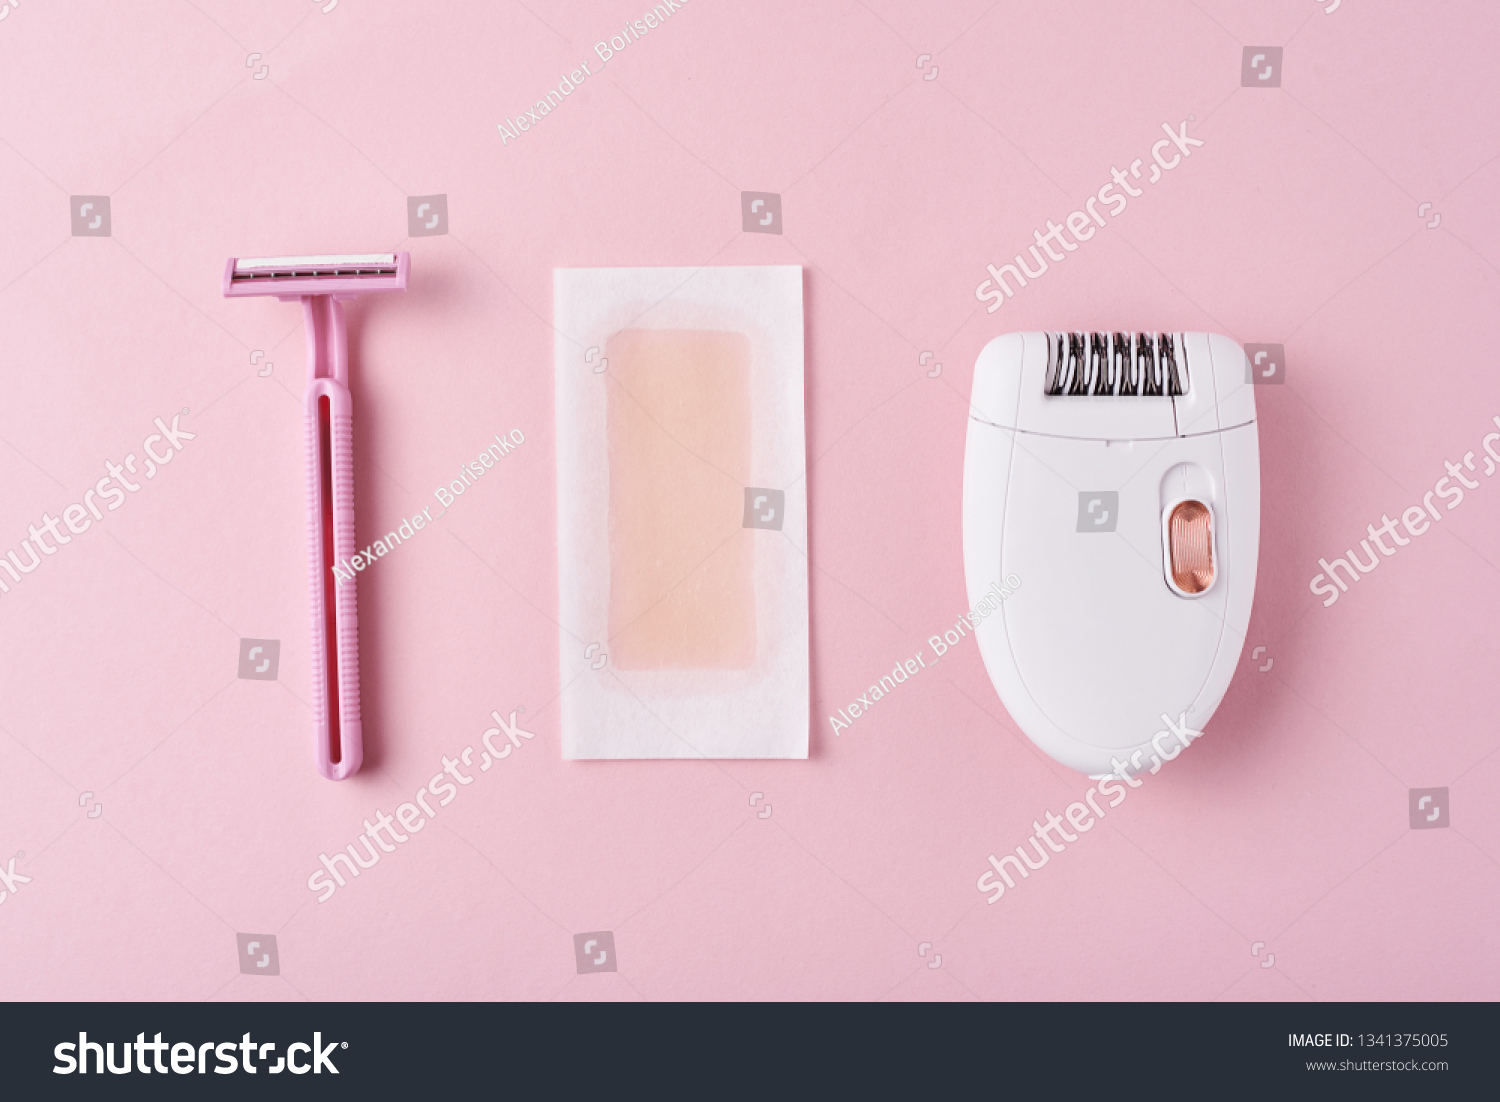 Epilator, razor for shaving and wax strips on pink background. Set for depilation, bodycare concept #1341375005